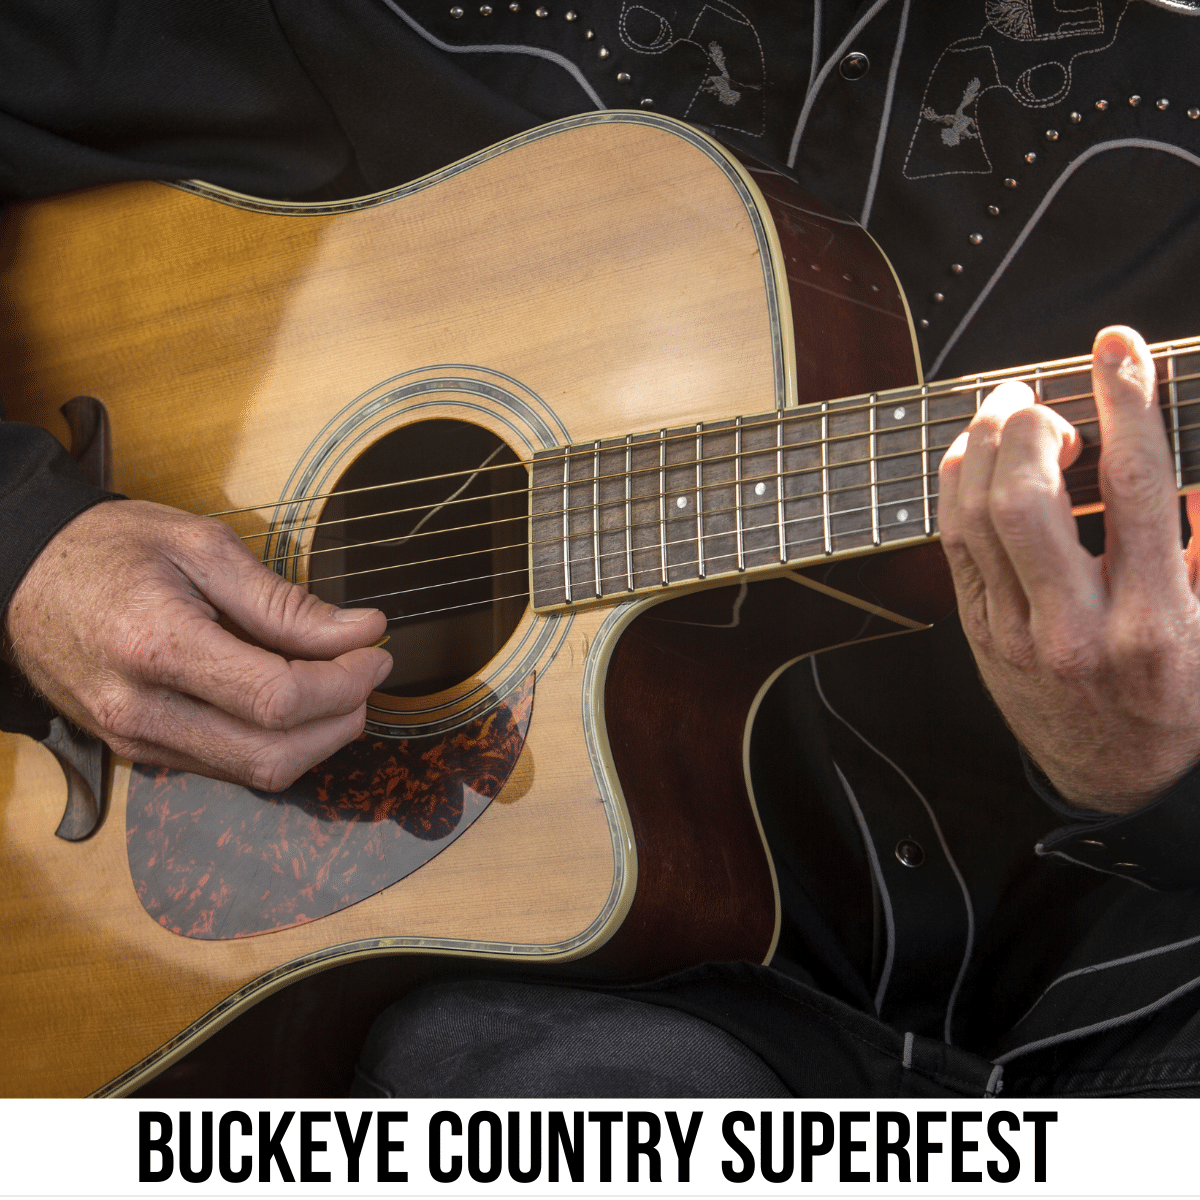 A square image of a photo of someone's hands on an acoustic guitar, playing music. A white strip across the bottom has text Buckeye Country Superfest